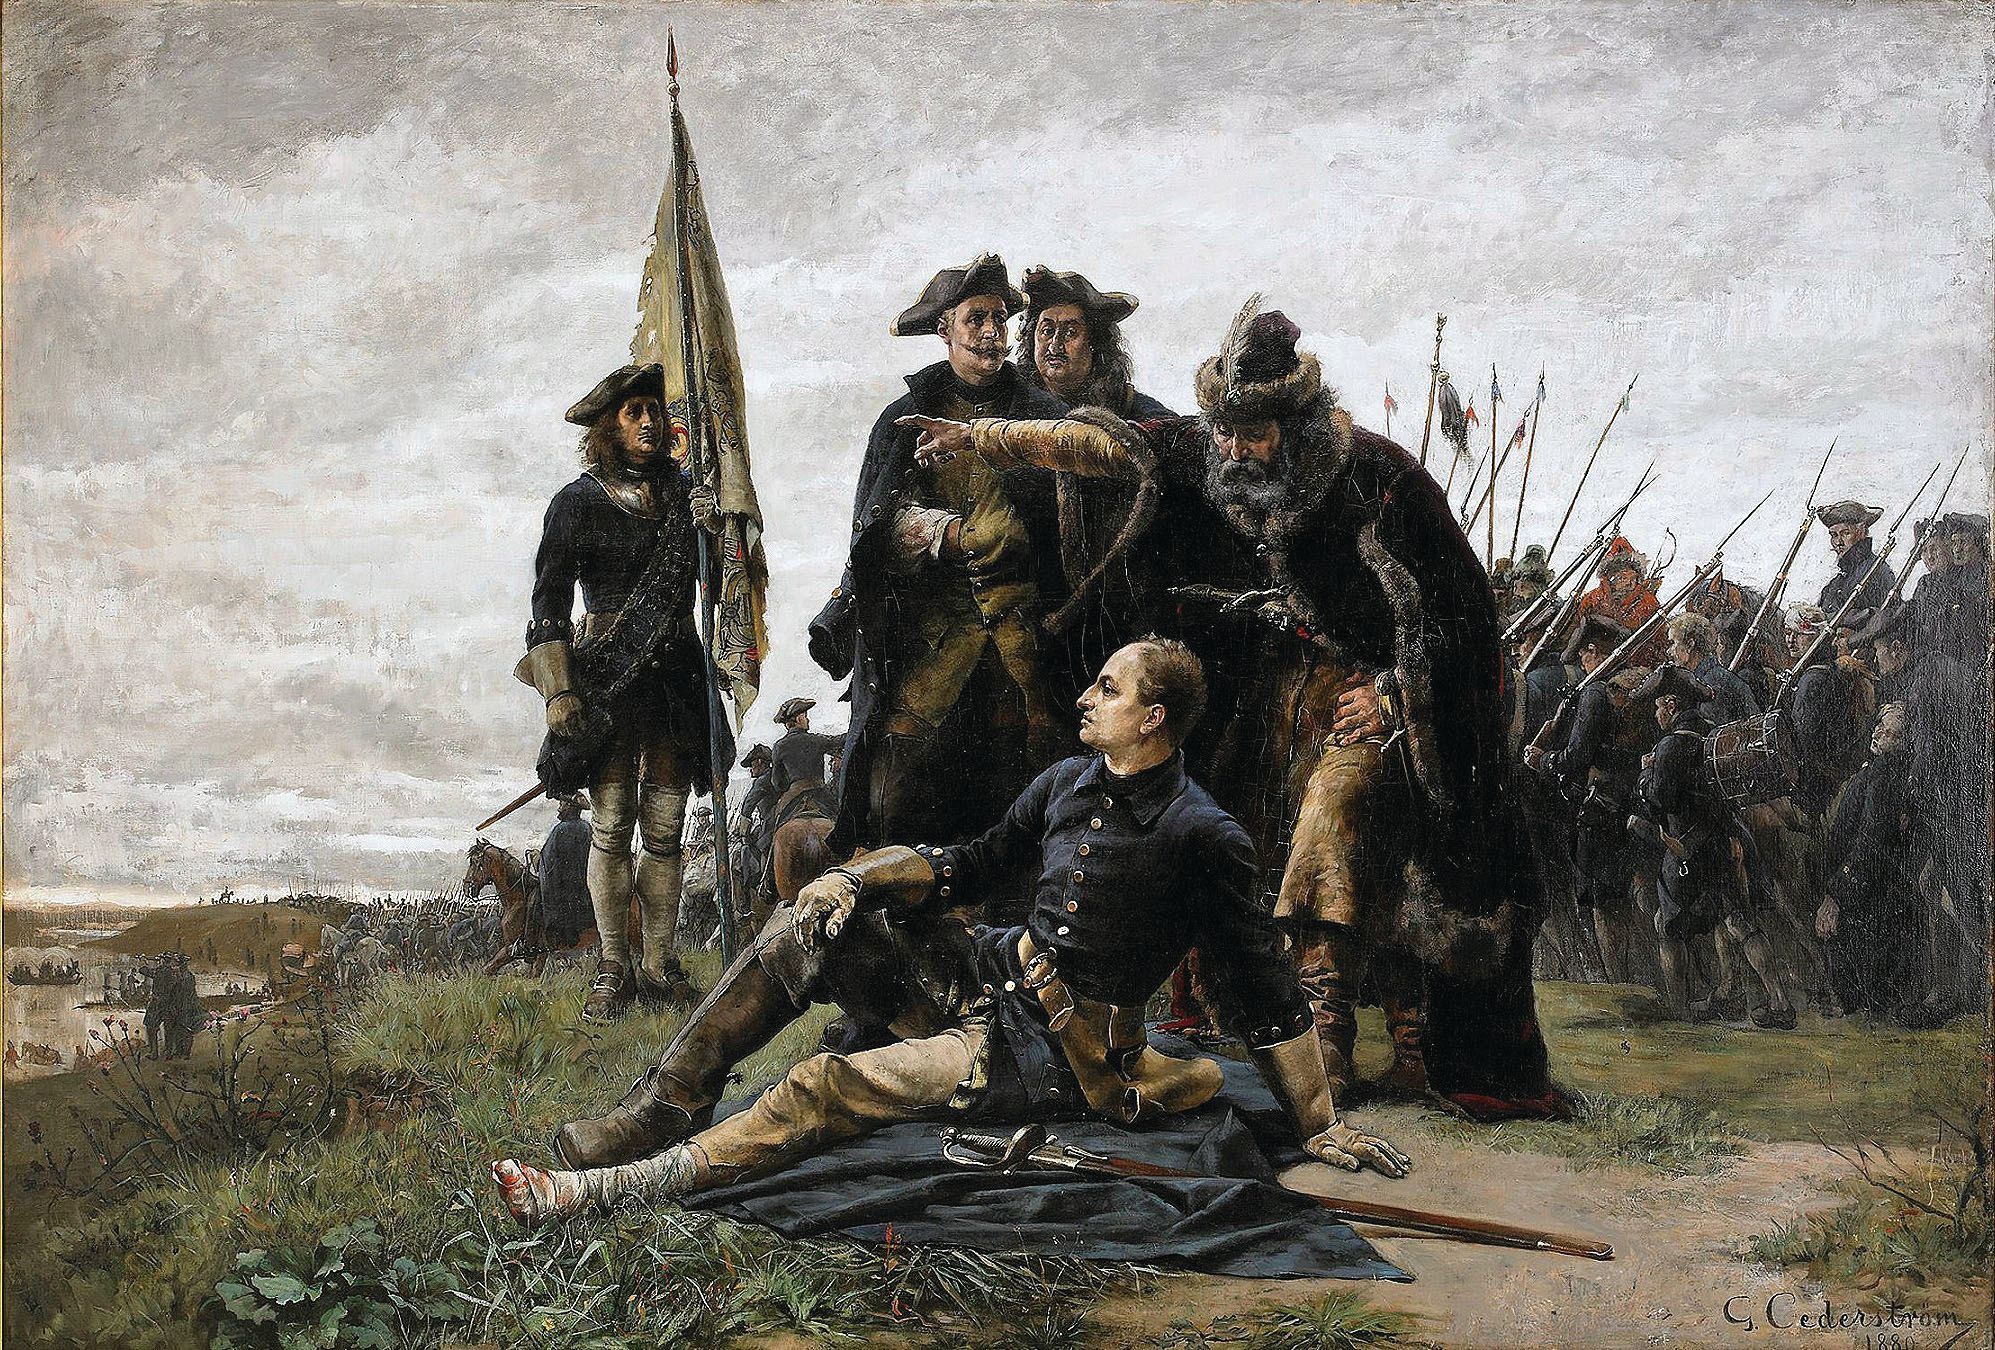 Leading a cavalry charge south of Poltova on June 27, 1709, Charles had his left foot shattered by a musket ball.  This 1880 painting by Gustaf Cedeström shows Charles, his shattered foot bandaged, watching with his Cossack ally Mazeppa as the battle unfolds under the command of Field Marshal Carl Gustav Rehnskjold. After fleeing the battle with Charles, Mazeppa died three months later.
